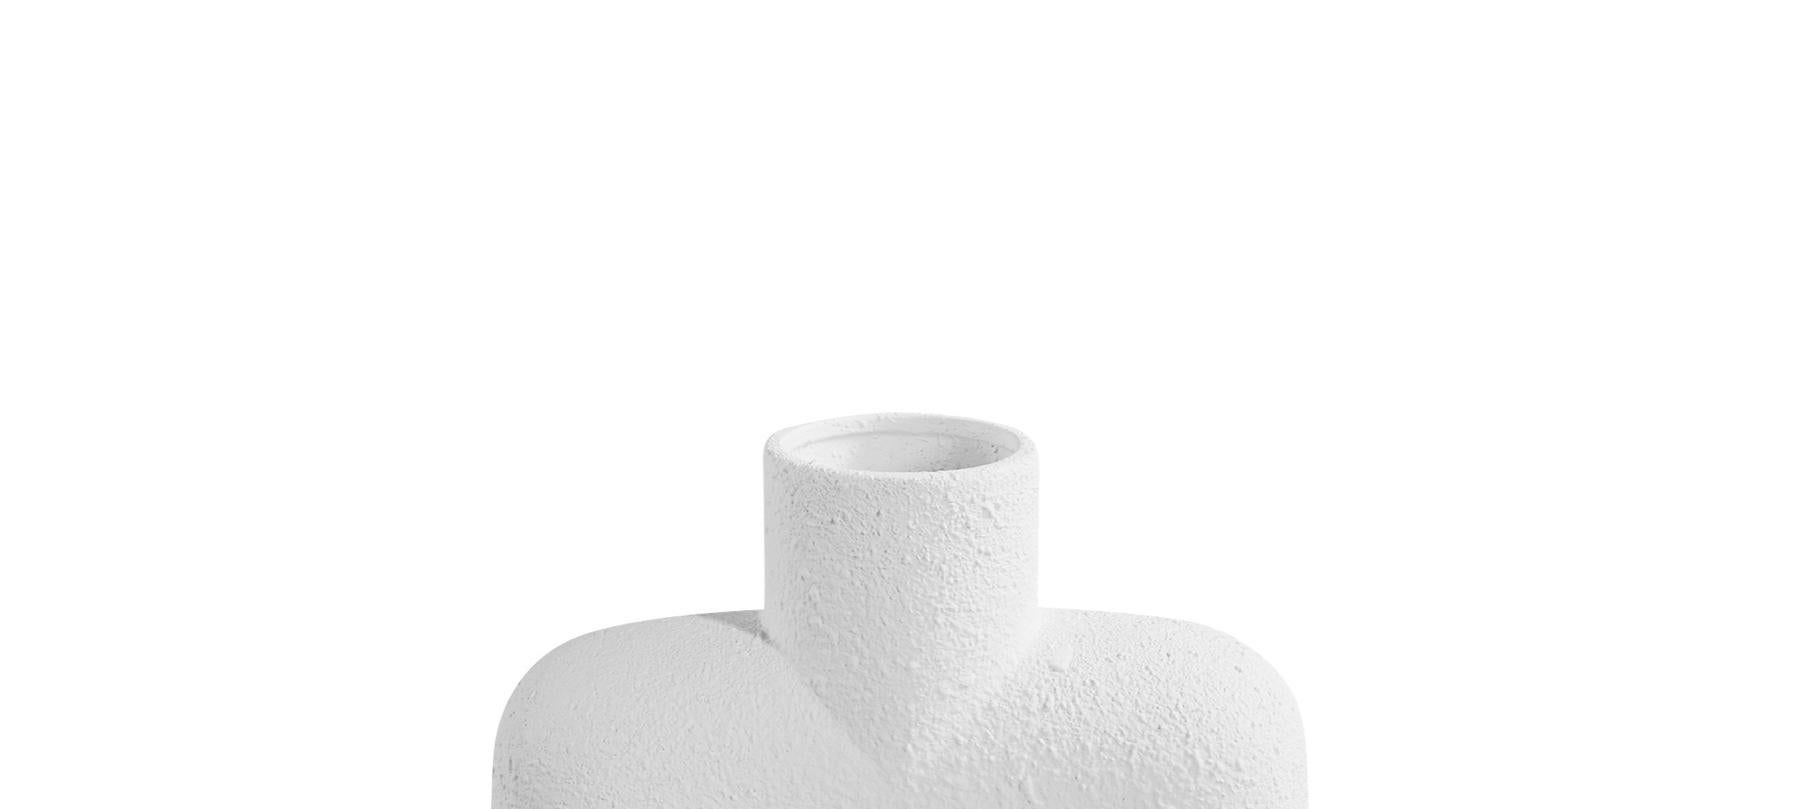 Contemporary Danish design textured white ceramic vase with single round spout on a base of two round spheres.
Very sculptural in design.
Two available and sold individually.

   